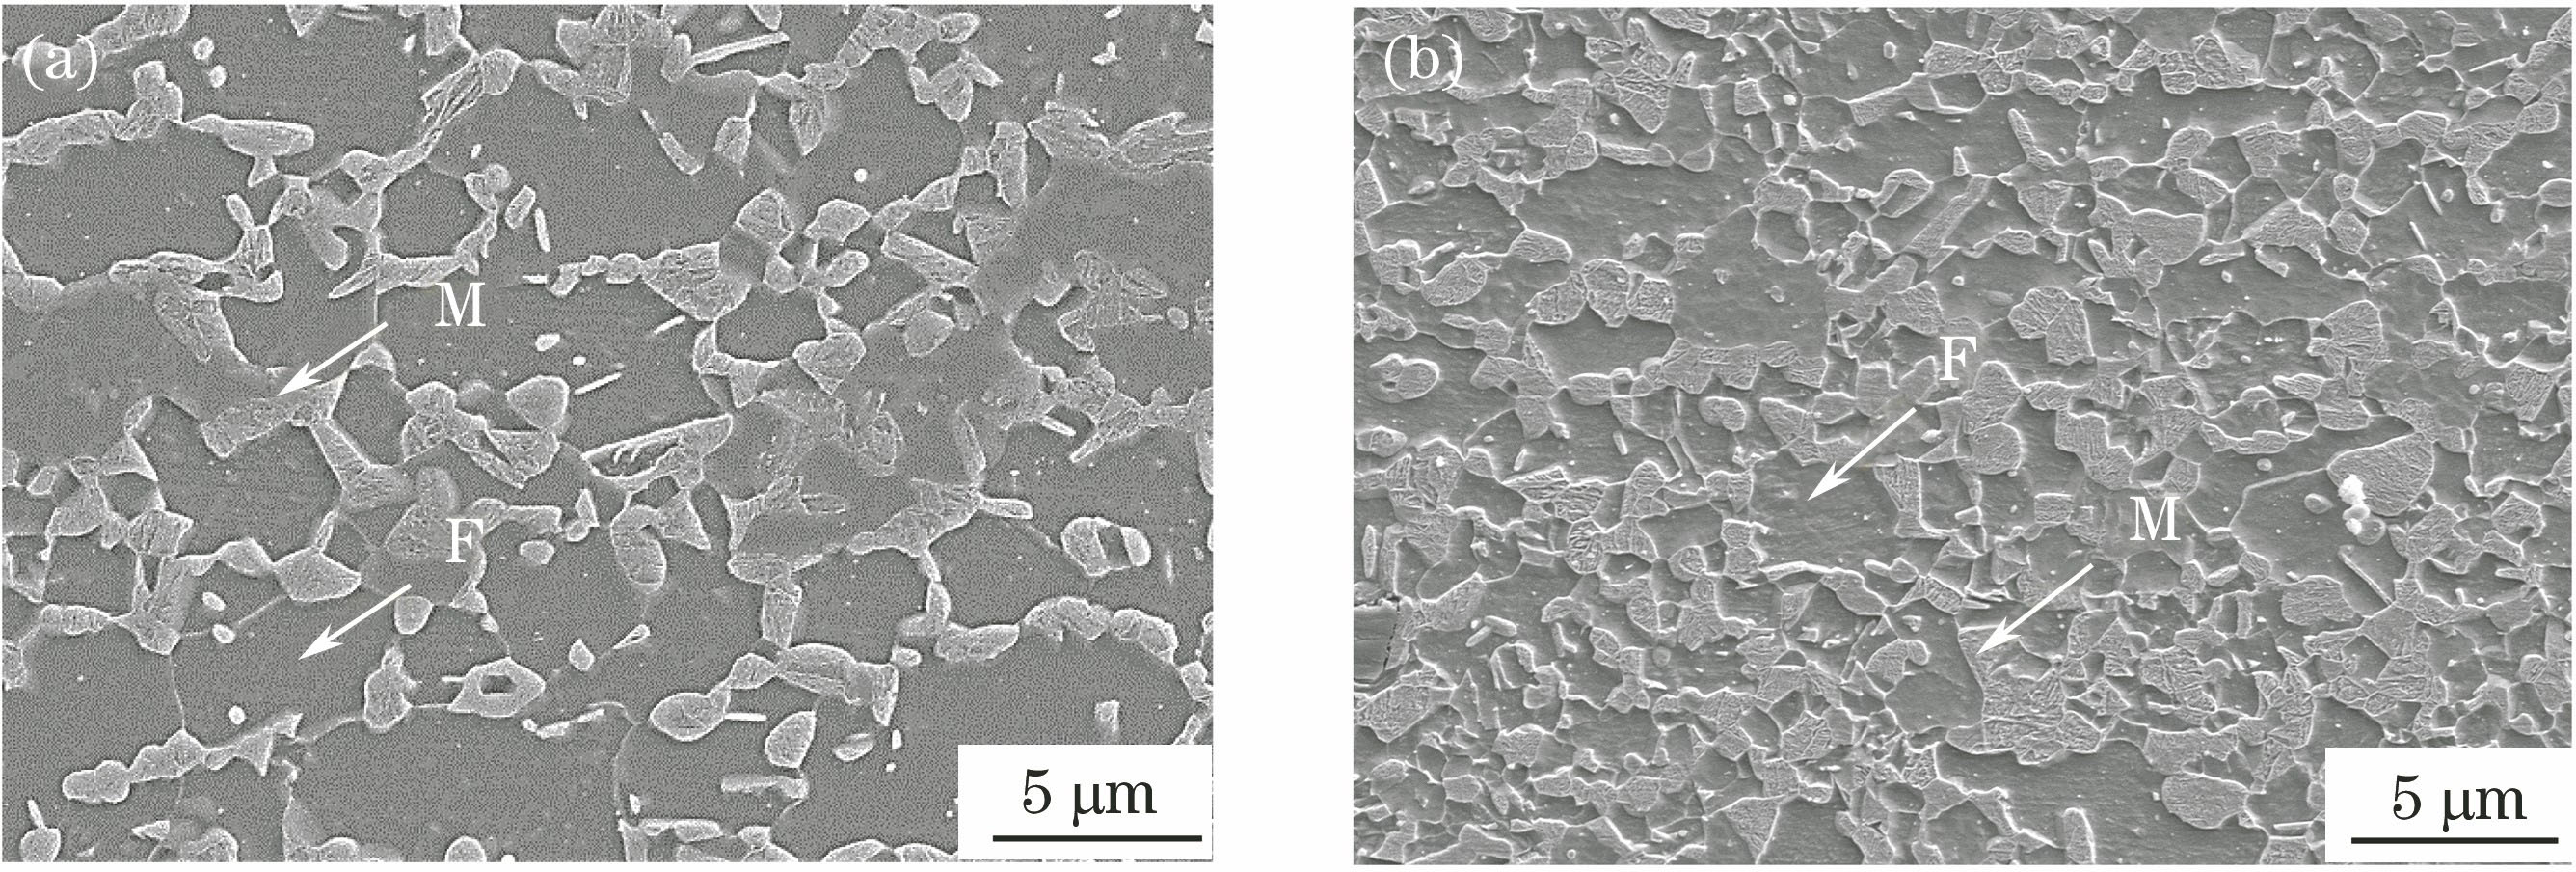 Microstructures of DP steels with different martensite contents. (a) 800 MPa; (b) 1000 MPa